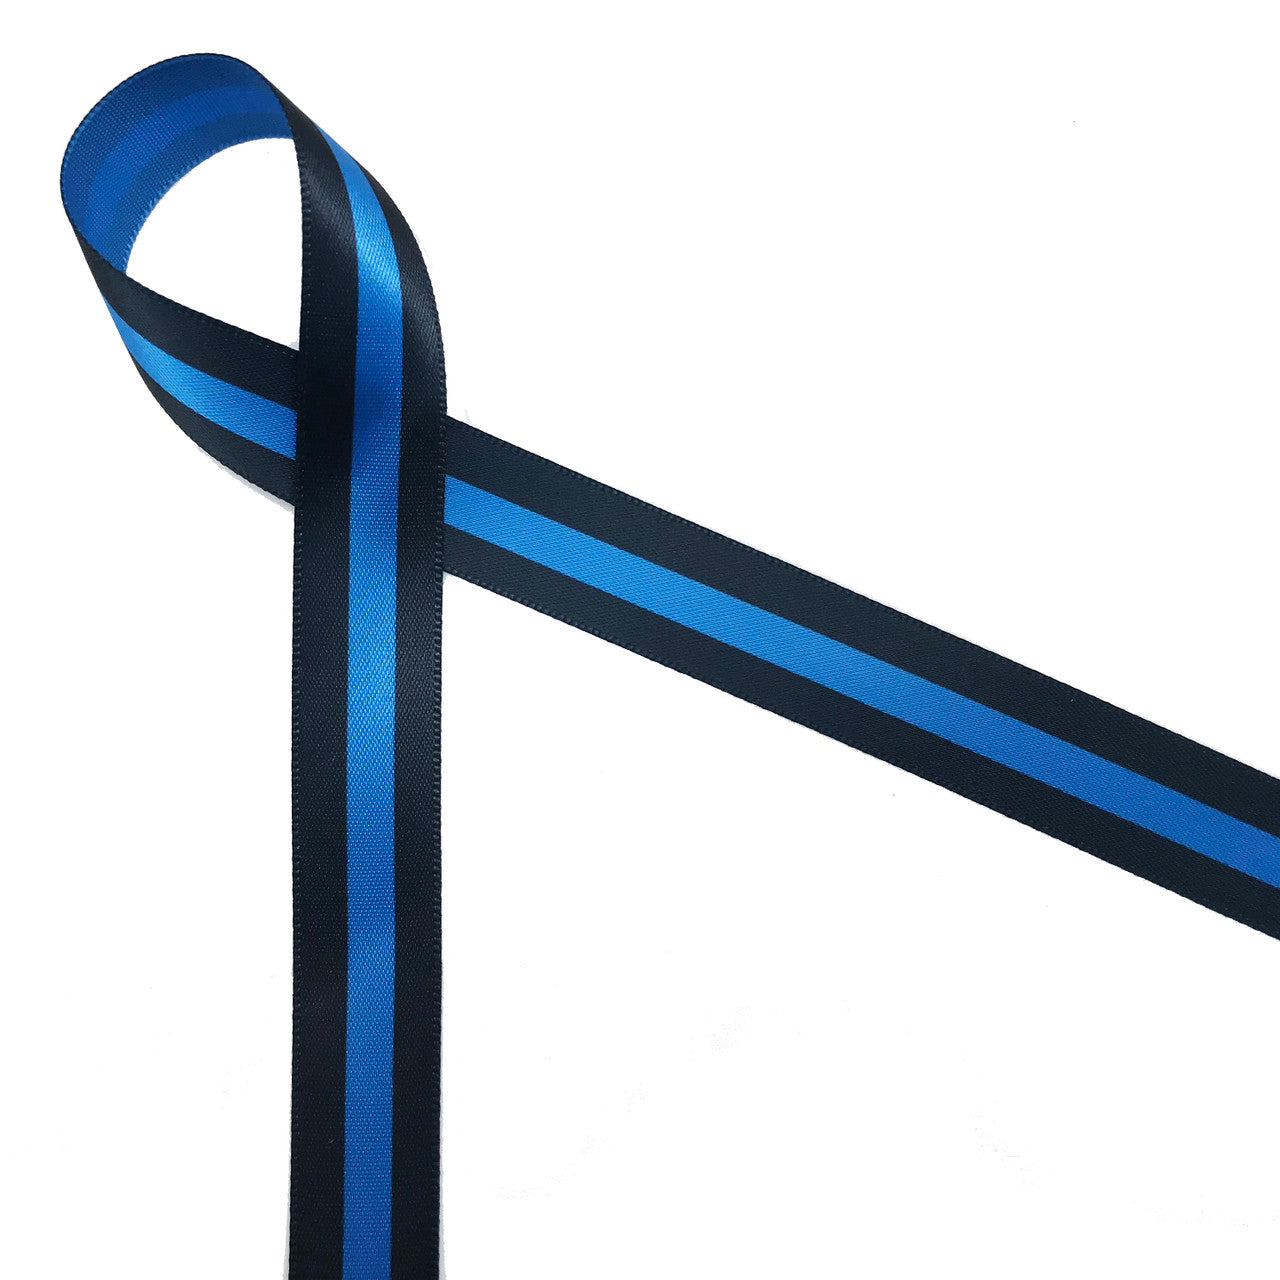 Thin blue line ribbon is printed with black lines on 5/8" Royal blue ribbon. These ribbons honor police officers fallen in the line of duty